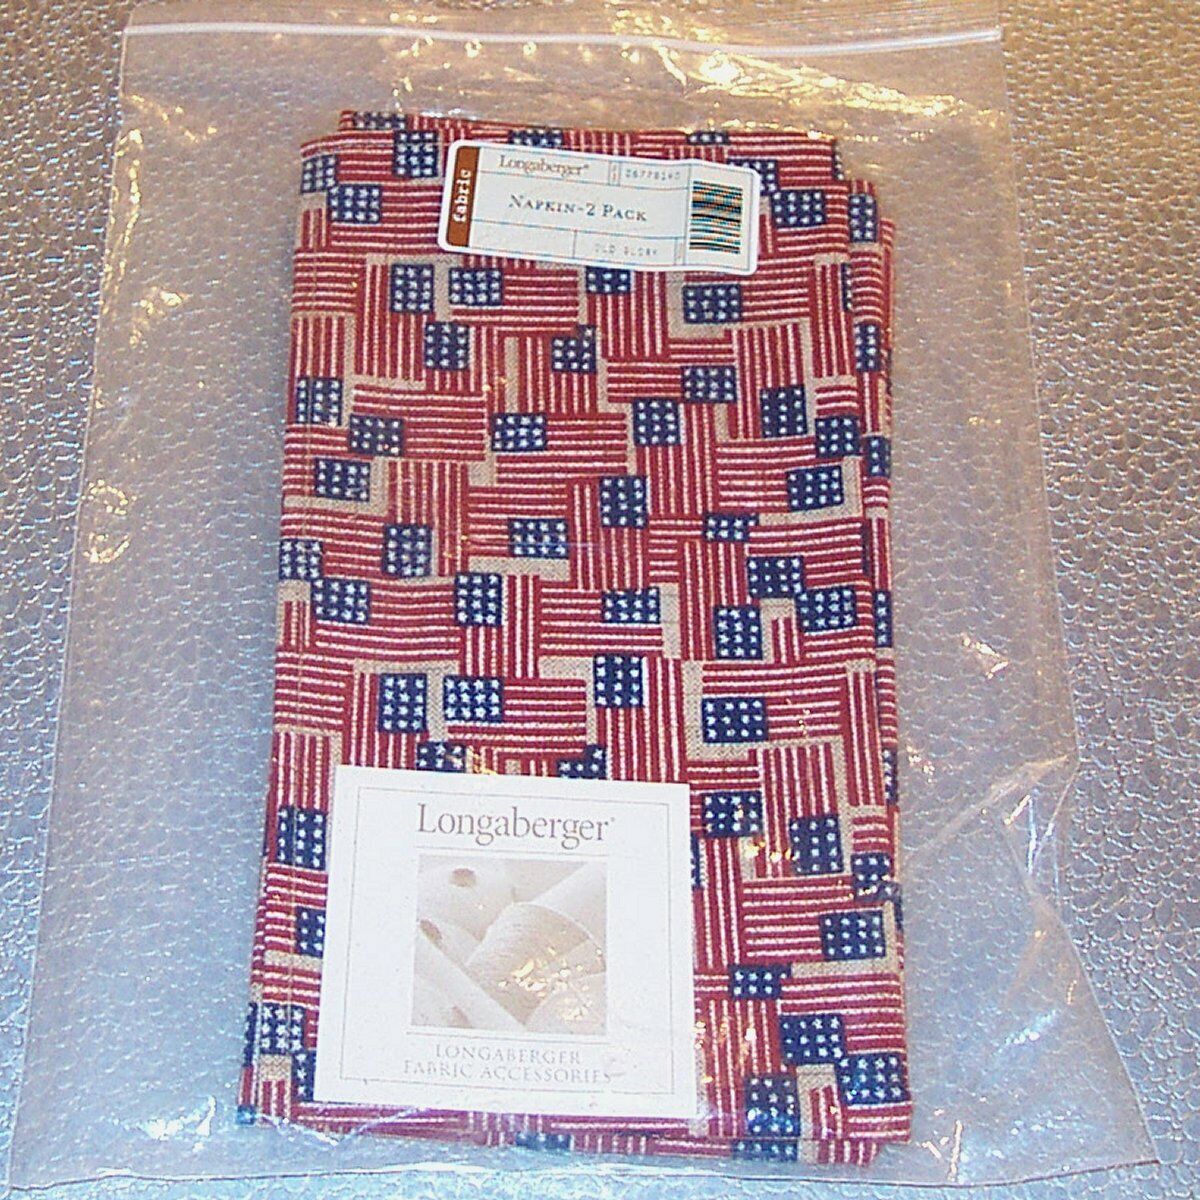 Longaberger Old Glory NAPKINS (Pair) ~Made in USA~ Hard-to-find 